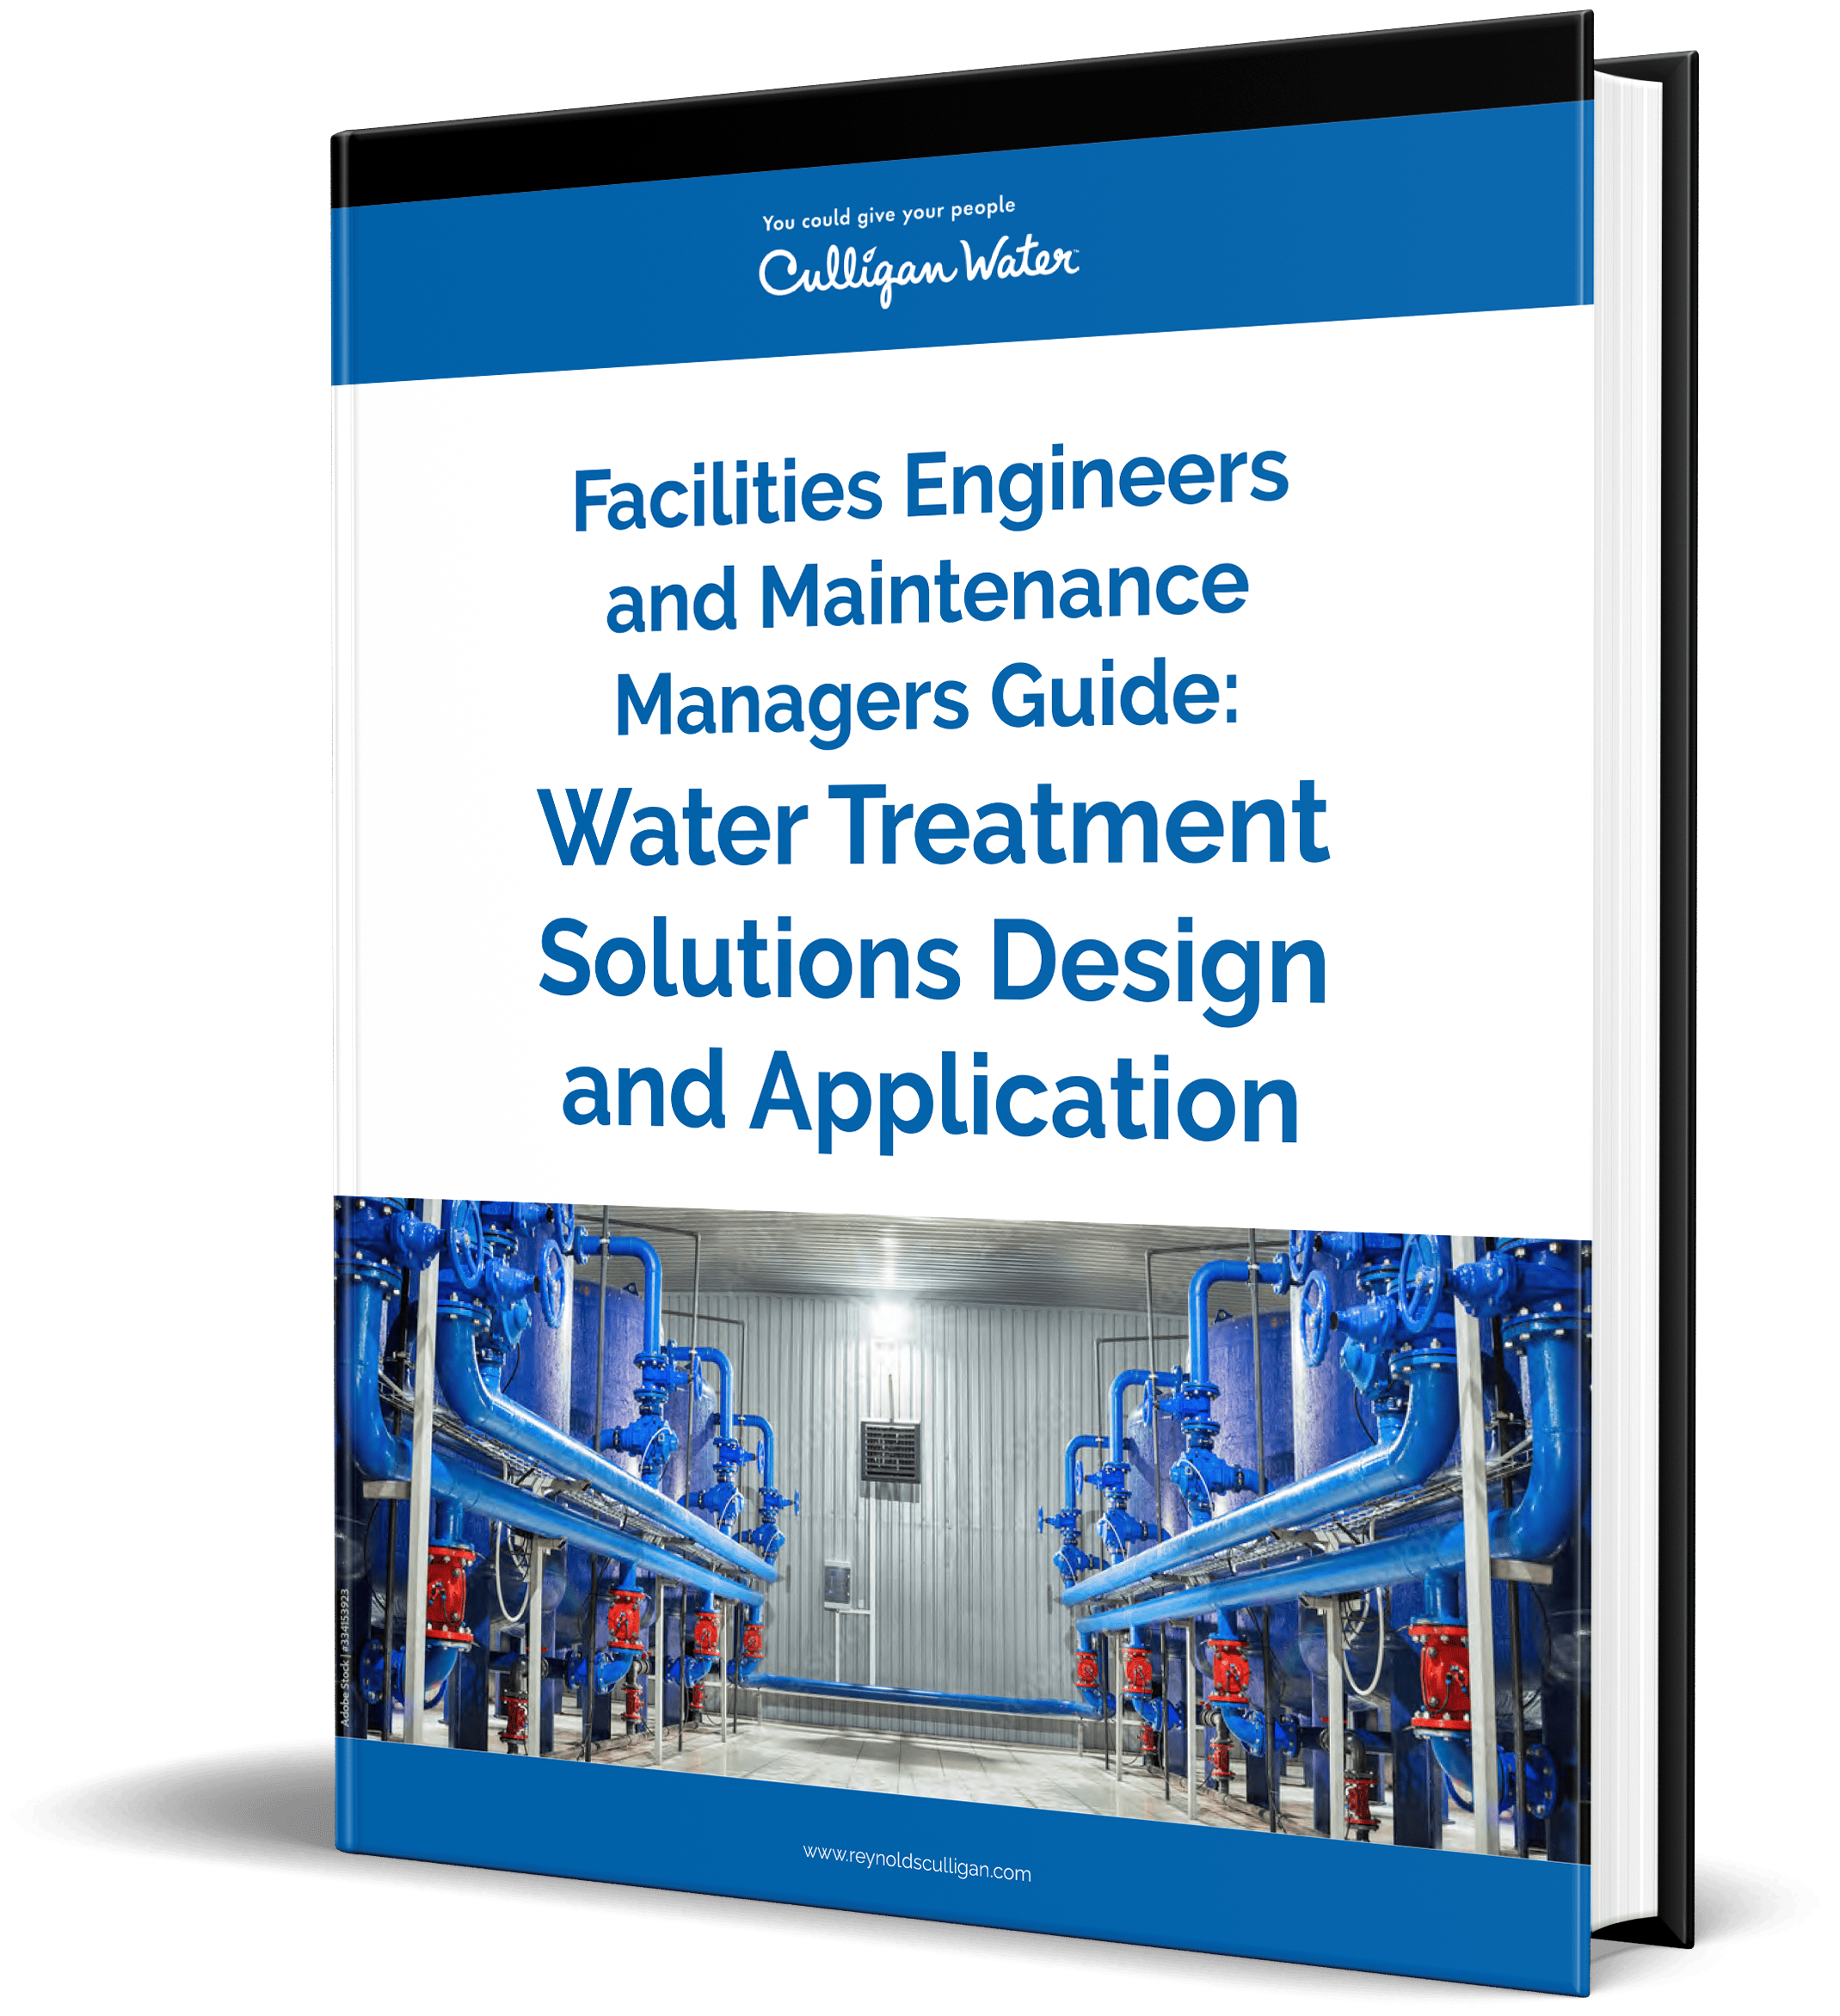 Facilities Engineers and Maintenance Managers Guide: Water Treatment Solutions Design and Application